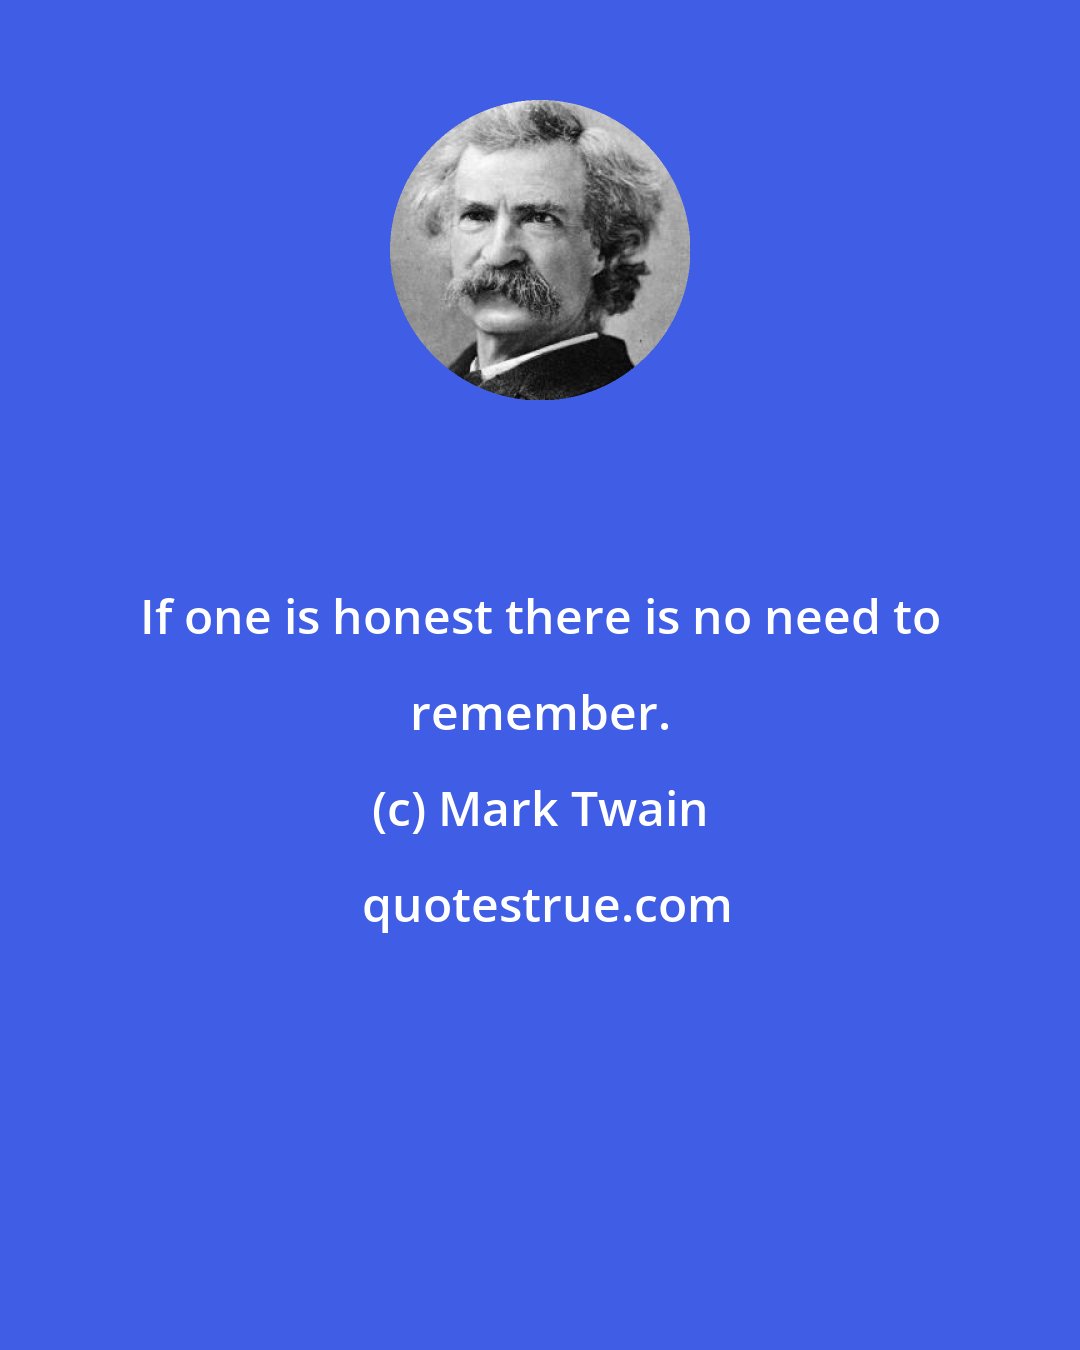 Mark Twain: If one is honest there is no need to remember.